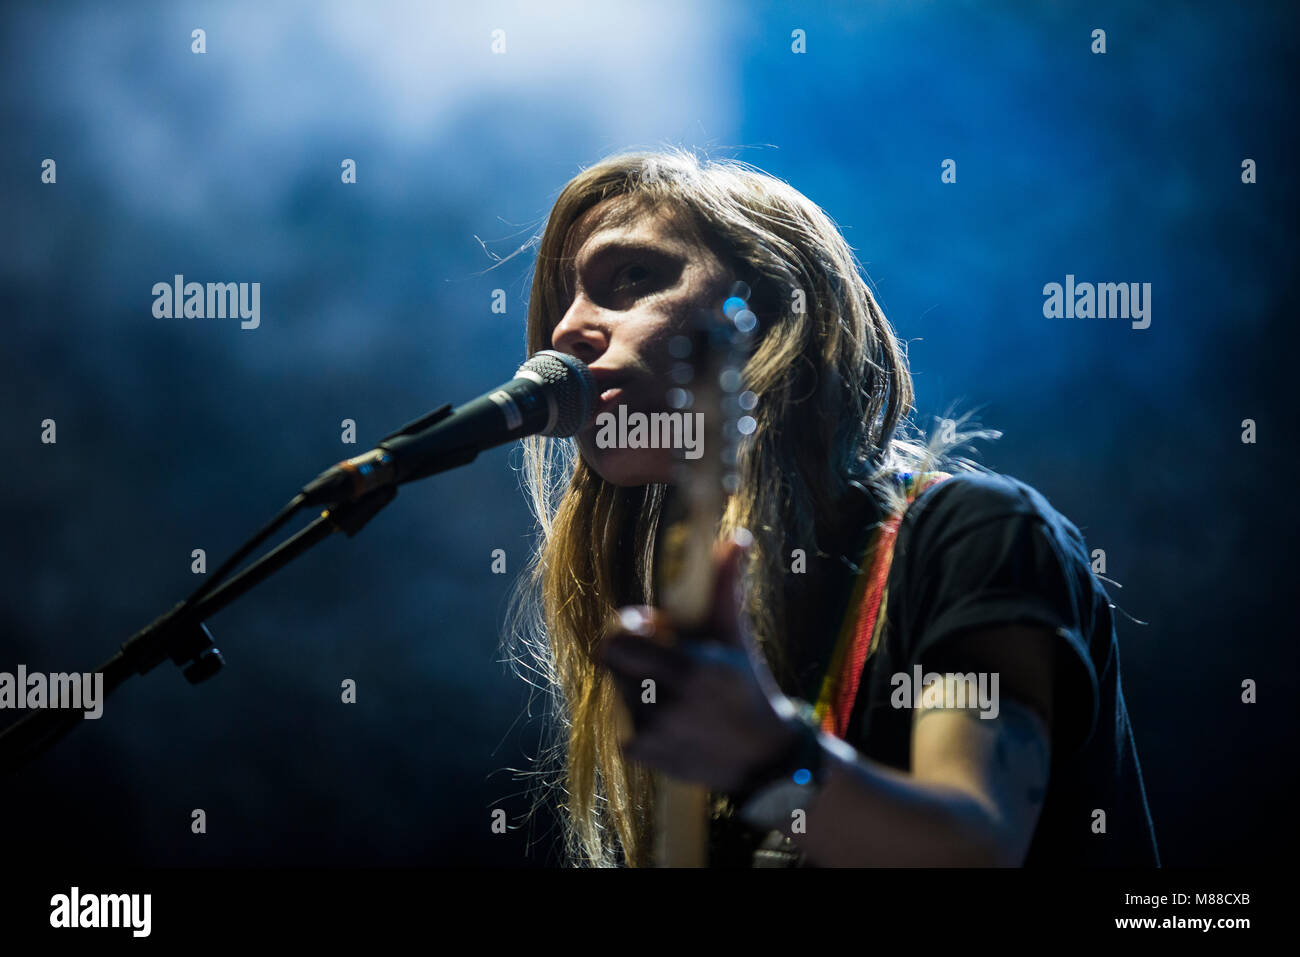 Brighton, East Sussex. 15th March 2018. American indie folk singer and guitarist Julien Baker performs live at the Brighton Dome in support of Belle and Sebastian. The concert follows Belle and Sebastian’s release of a trio of EPs under the name ‘How to Solve Our Human Problems’. Both artists are signed to Matador Records. Credit: Francesca Moore/Alamy Live News Stock Photo